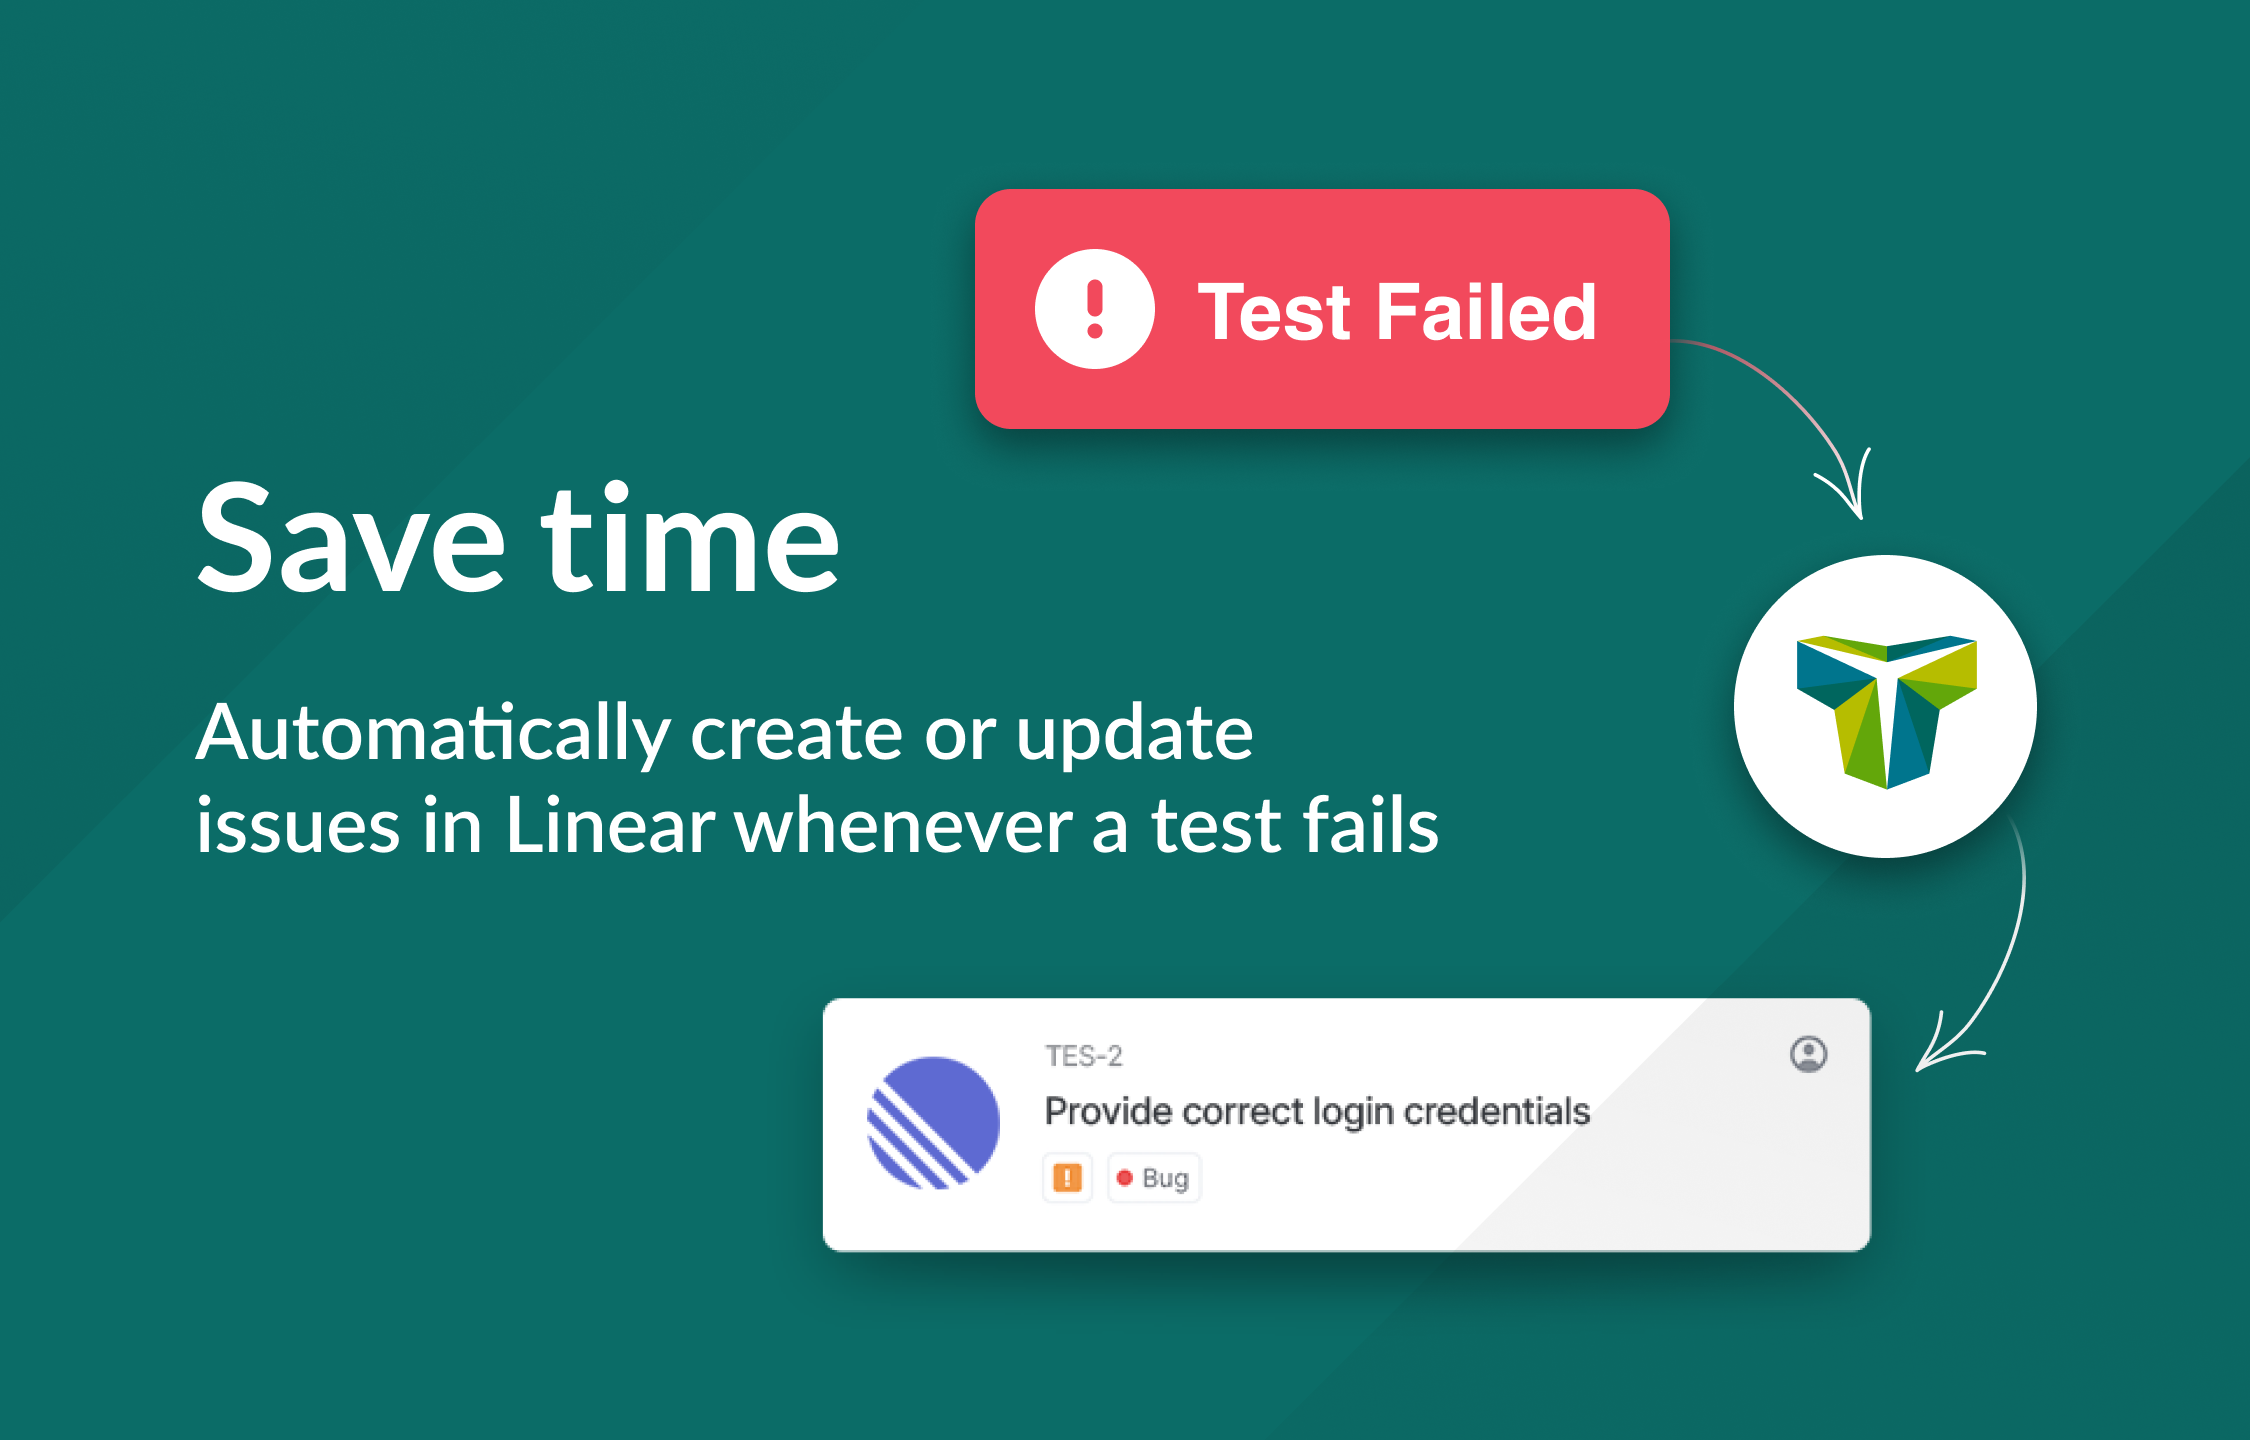 Image shows test failing being turned into a Linear issue